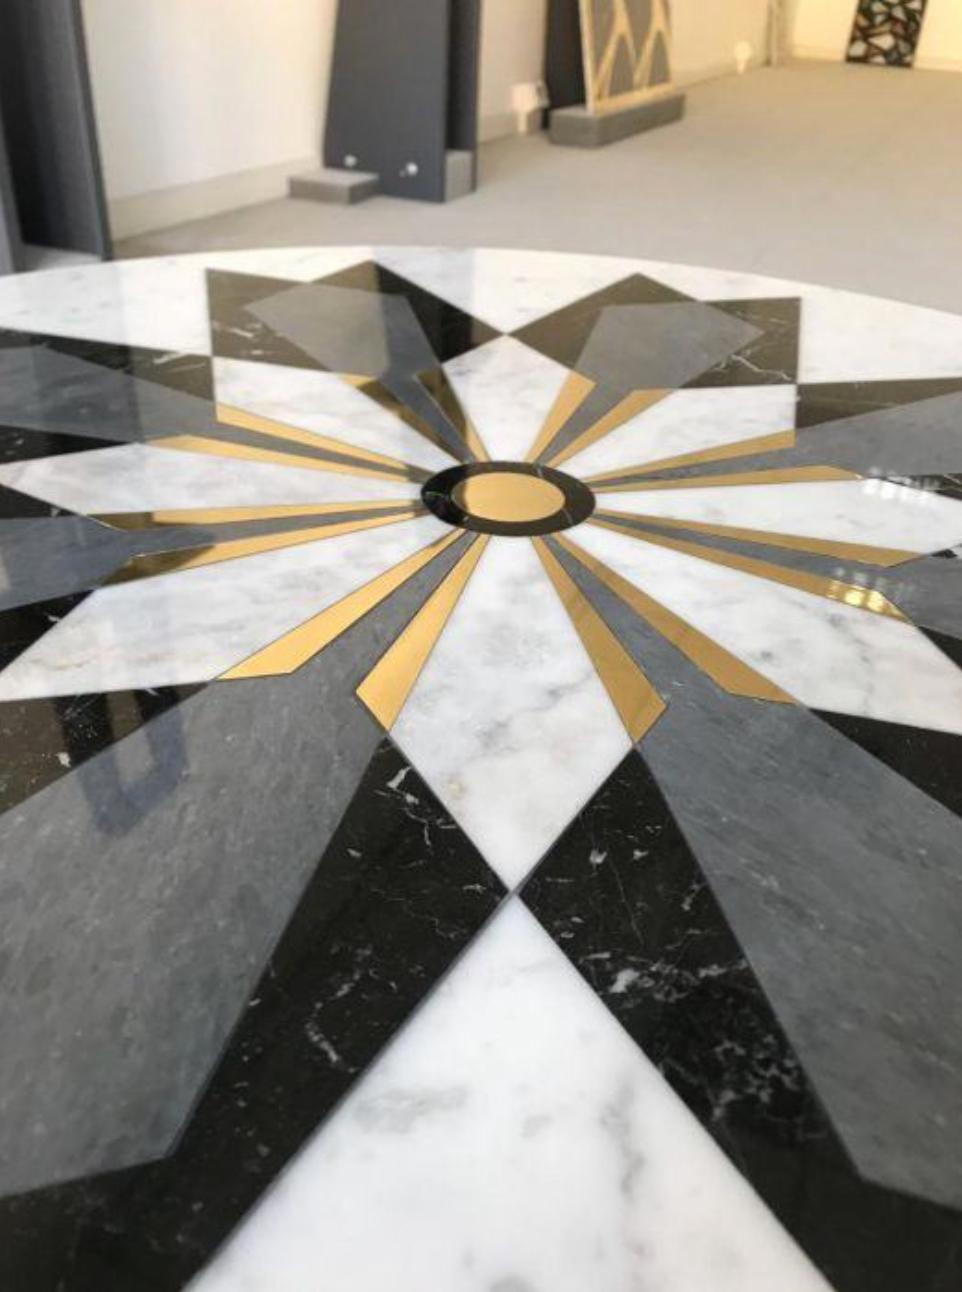 This diamond inlay table is designed by Davide Silvestri in Carrara, Italy. 

The materials used for this particular edition of 30 include white Carrara marble, Nero Marquina, grey Imperiale marble and brass inlays. Base material and dimensions